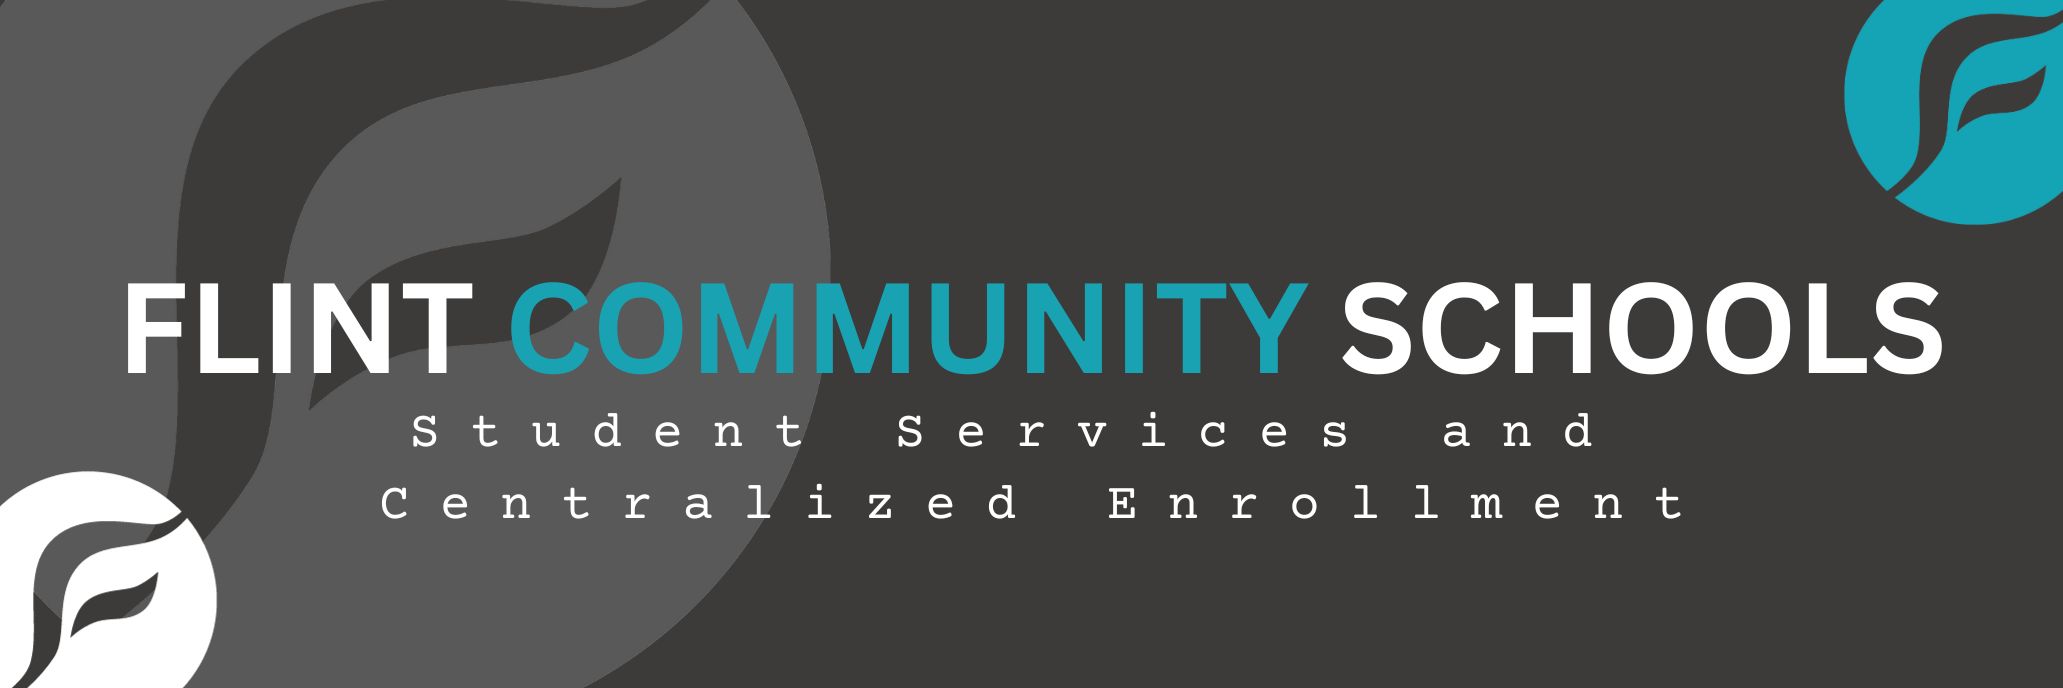 Flint Community Schools Student Services and Centralized Enrollment